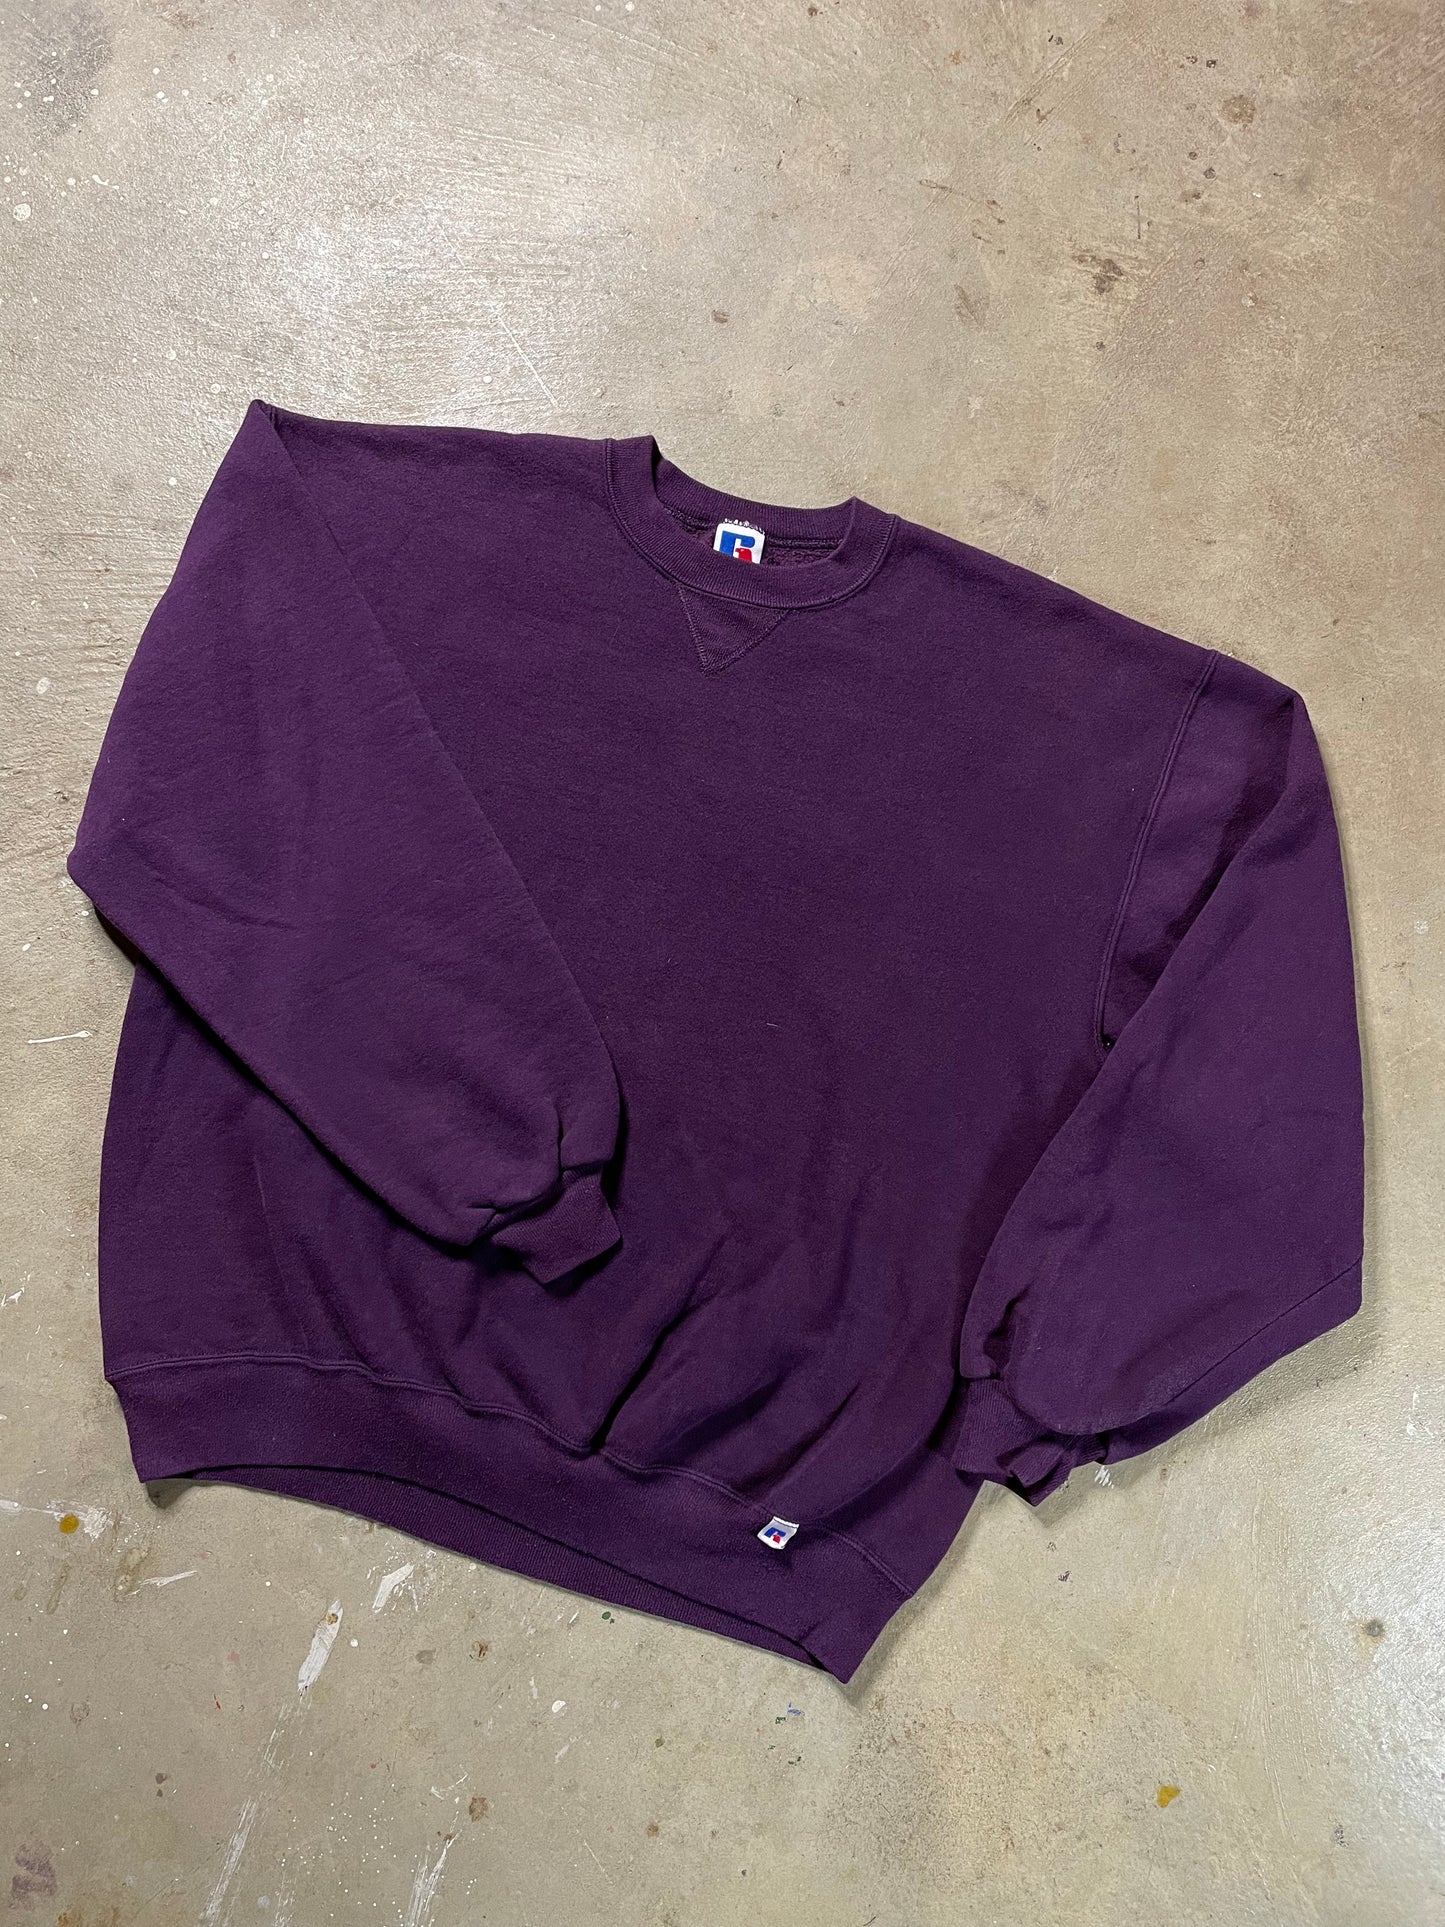 1990s Russell Athletic Crewneck